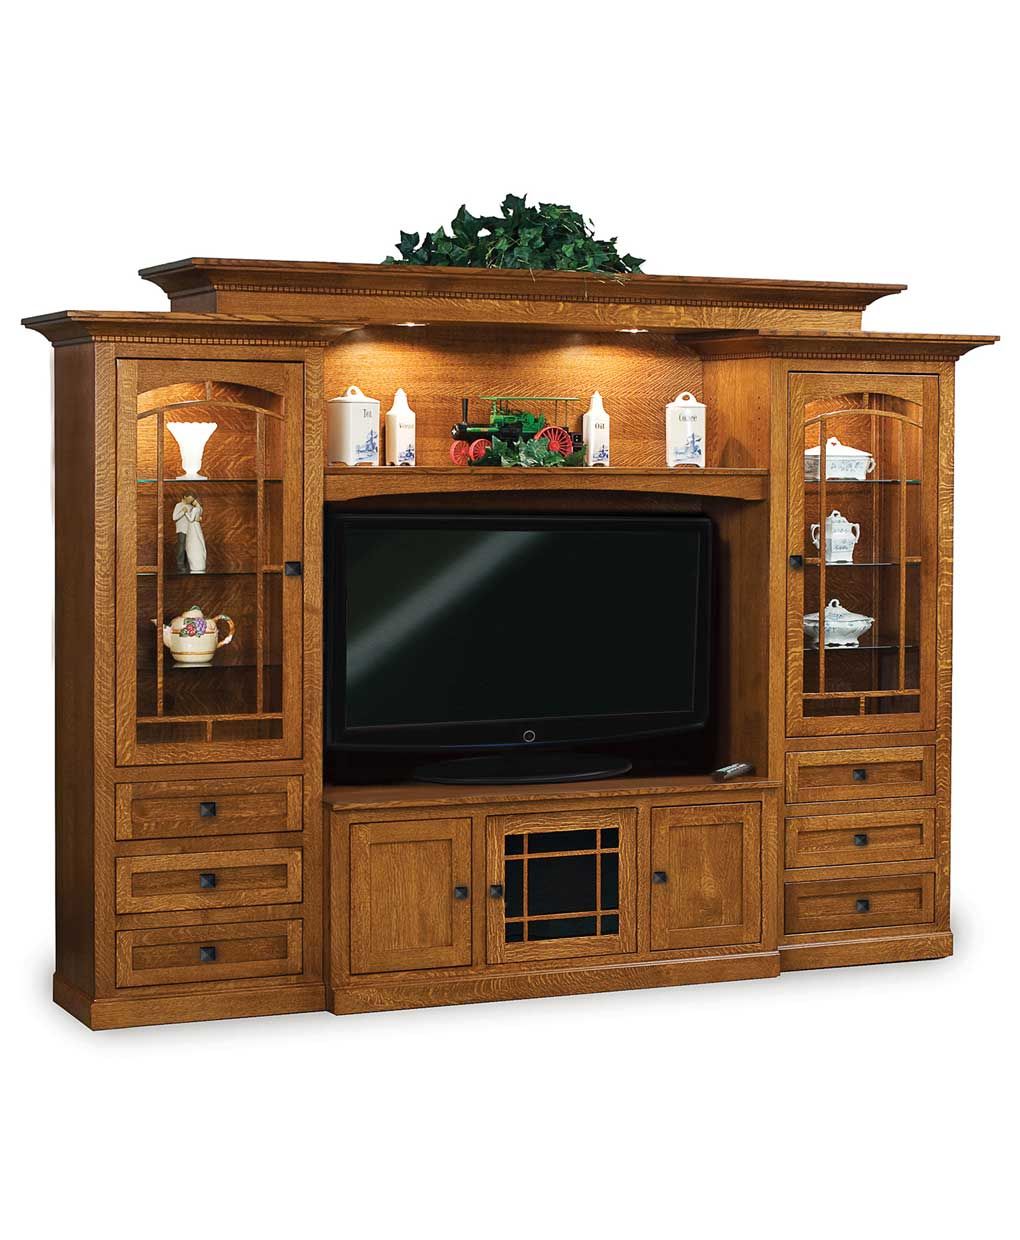 Manhattan Mission 6 Piece Wall Unit With Adjustable Bridge – Amish Direct  Furniture Within Entertainment Units With Bridge (View 13 of 15)